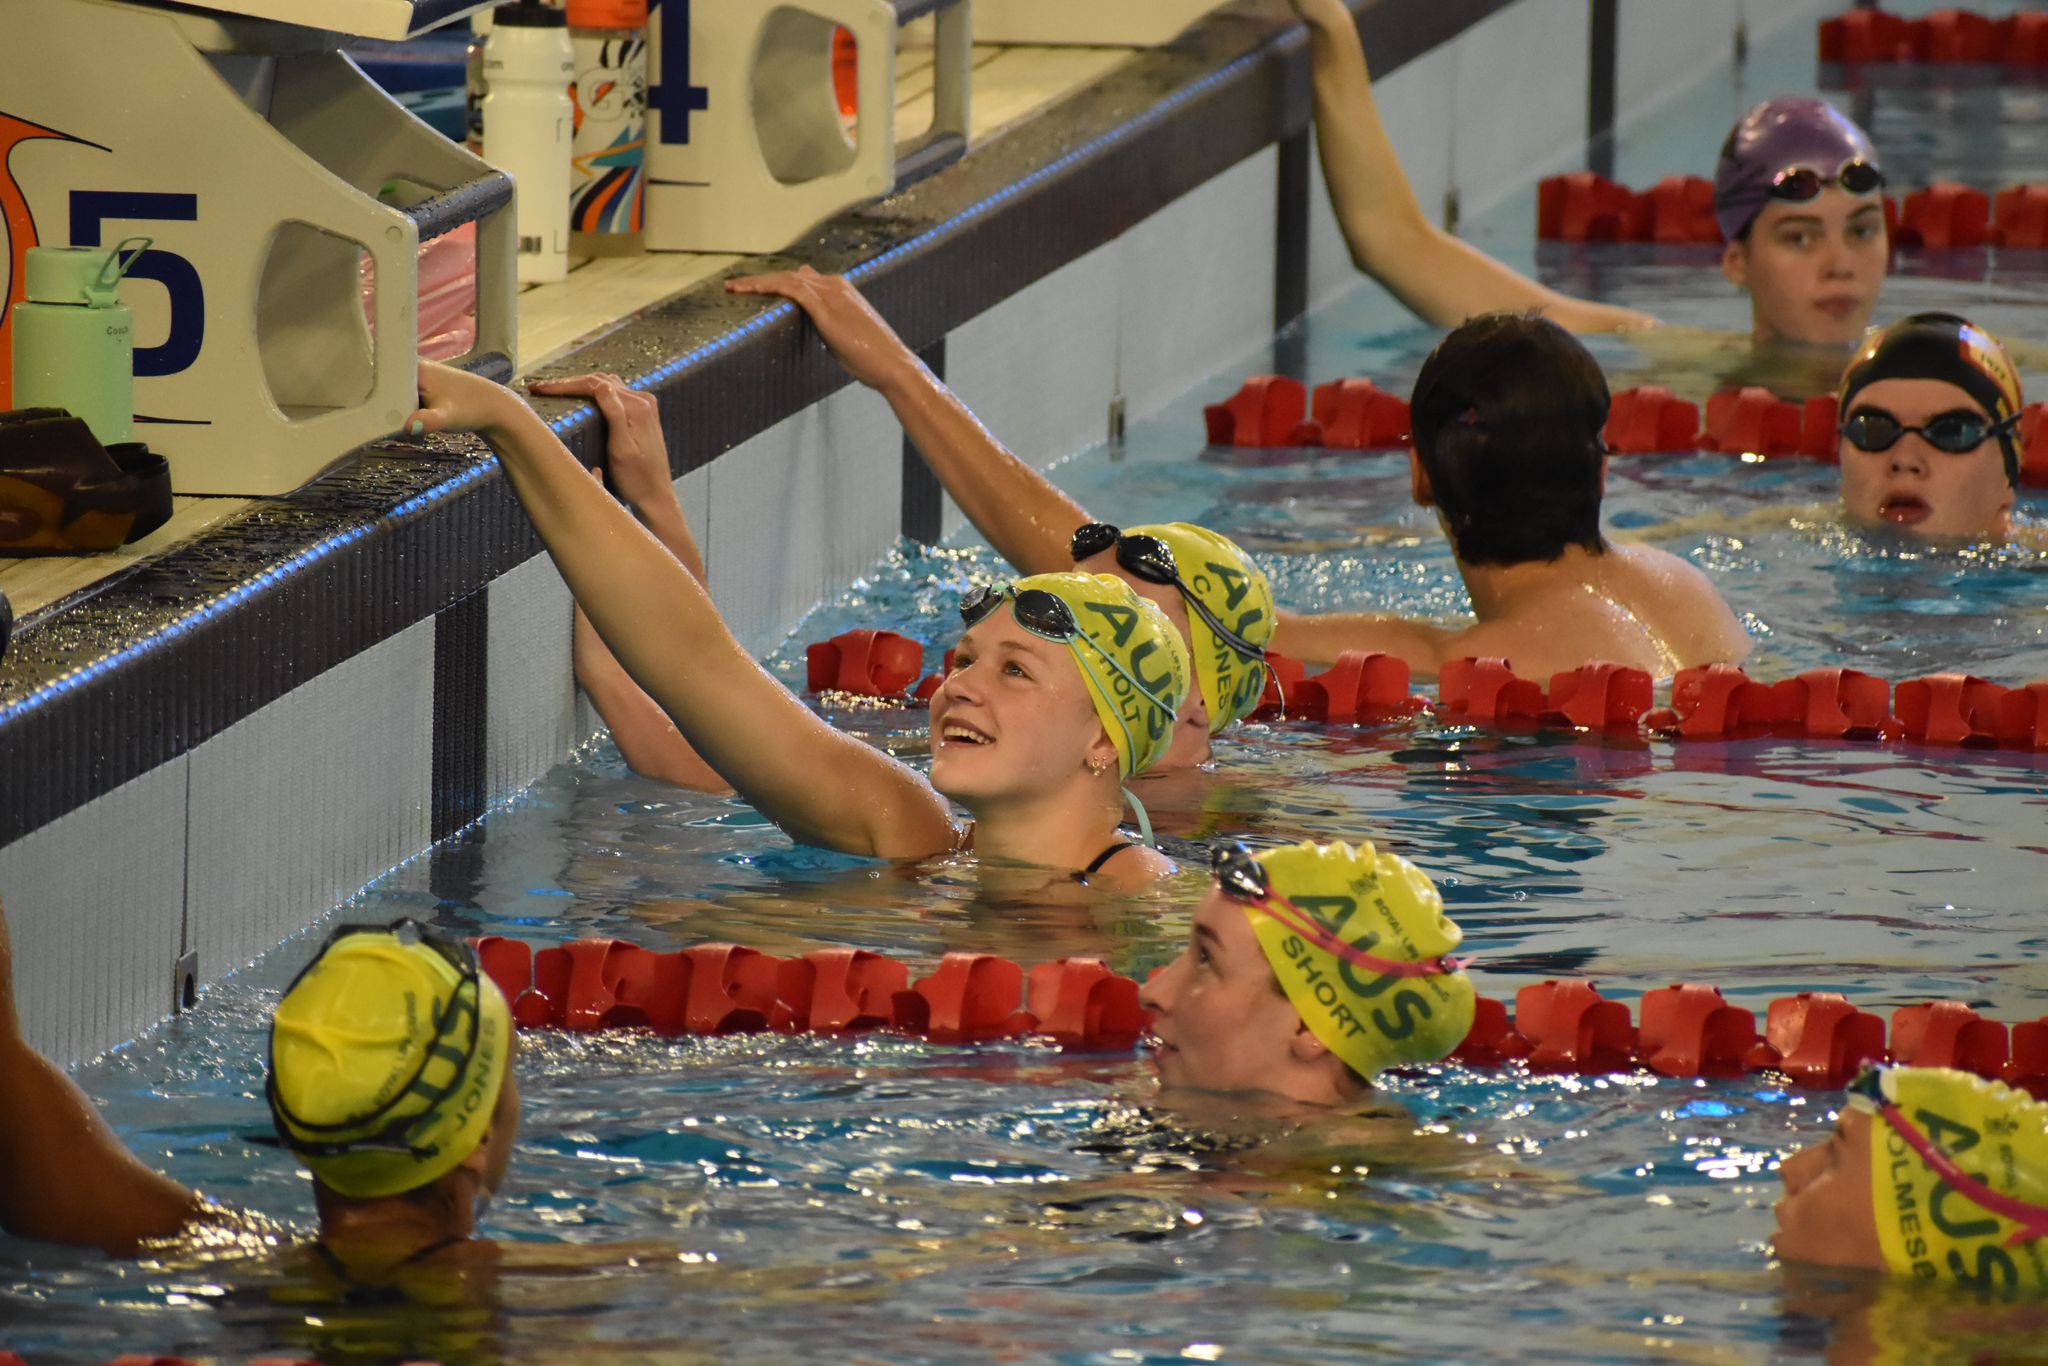 A photo of an Australian women's Relay Team with all four swimmers in the water. They are wearing Australian swimming caps.